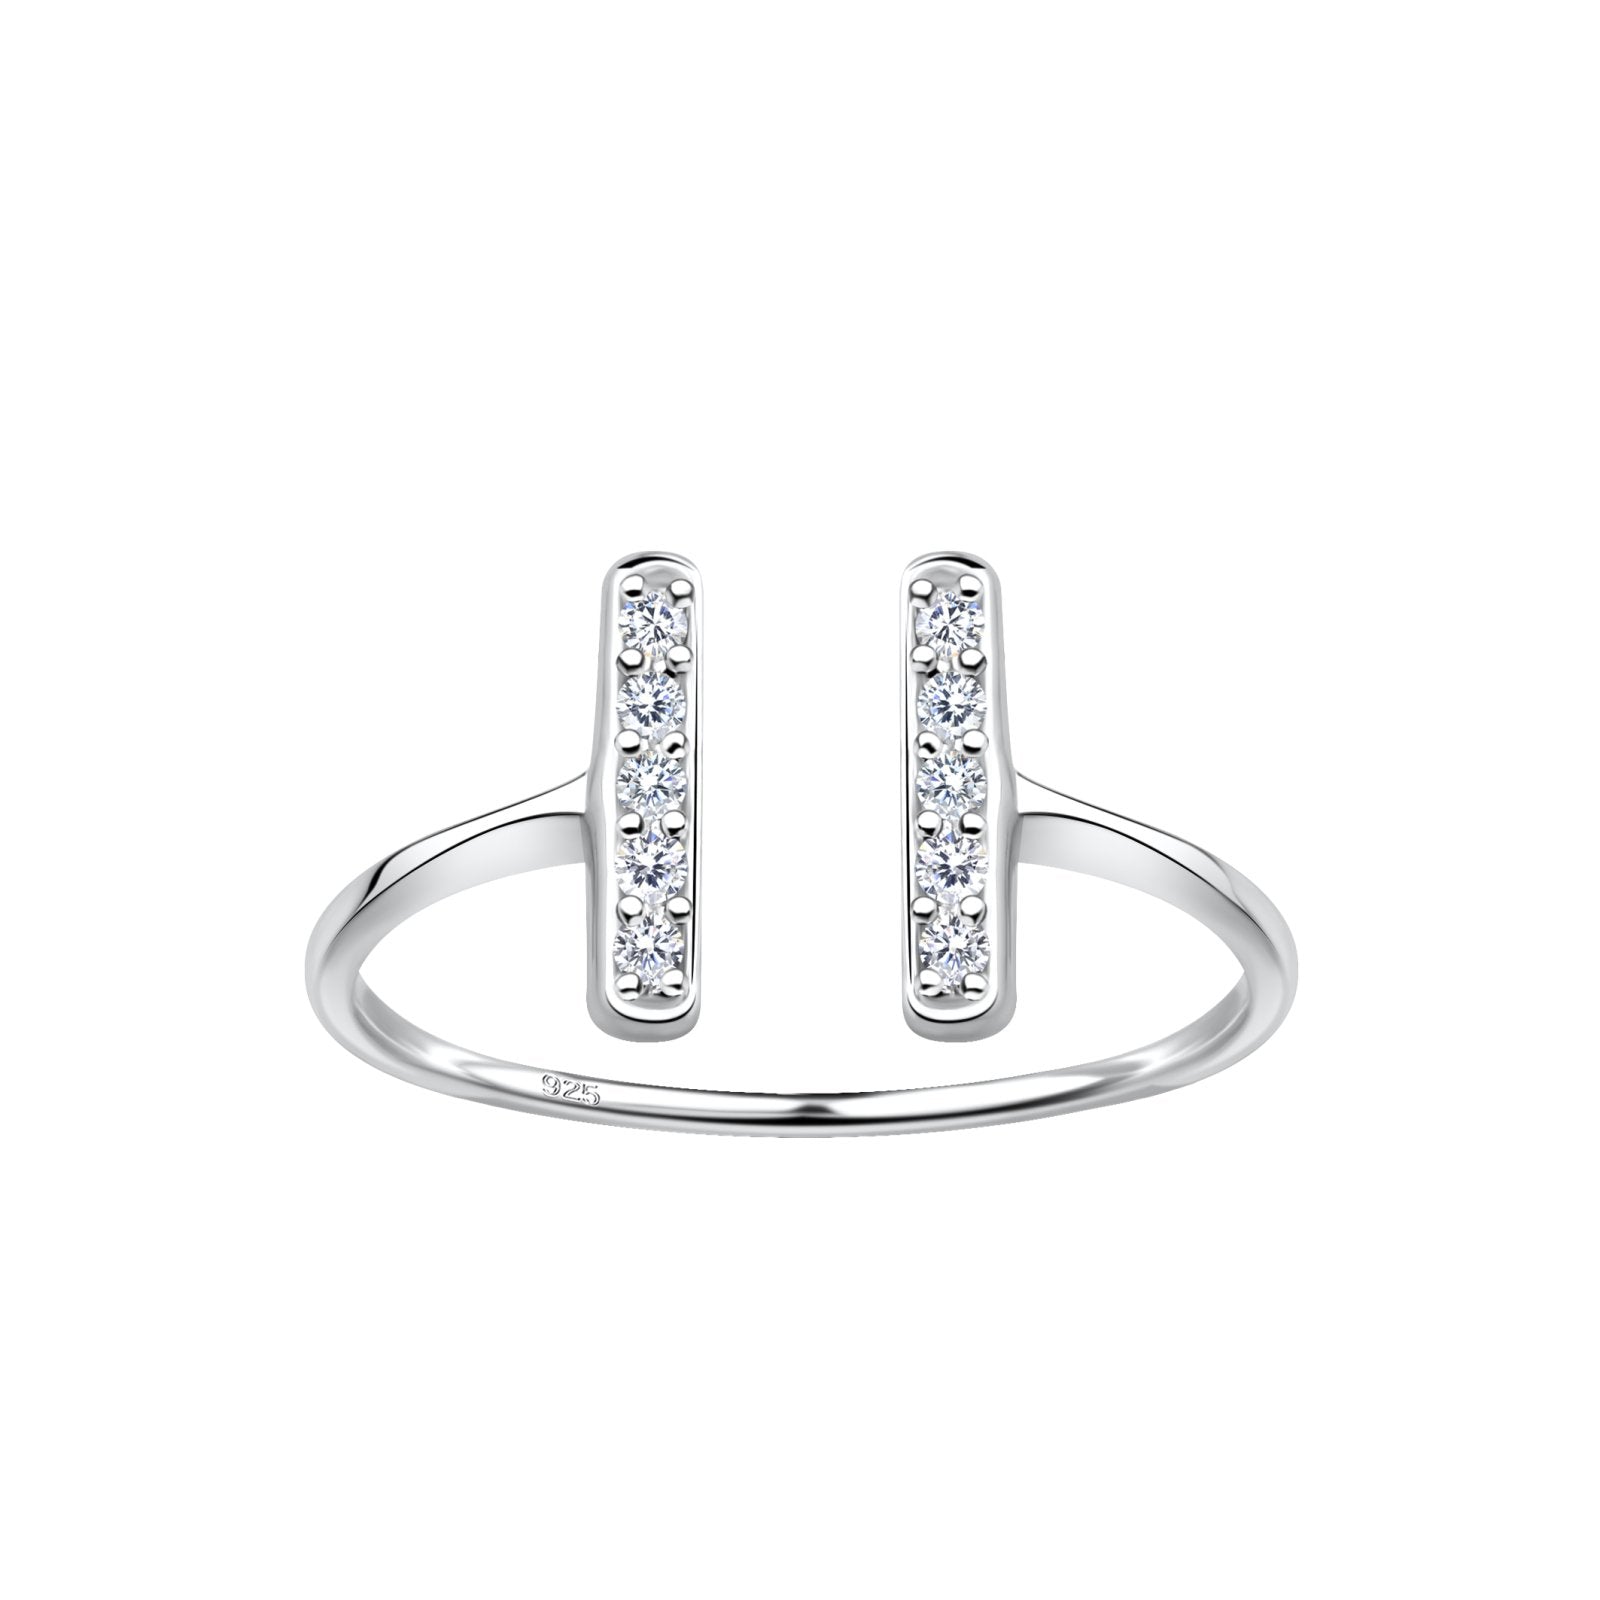 Silver Opened Bar Ring setting with Cubic Zirconia